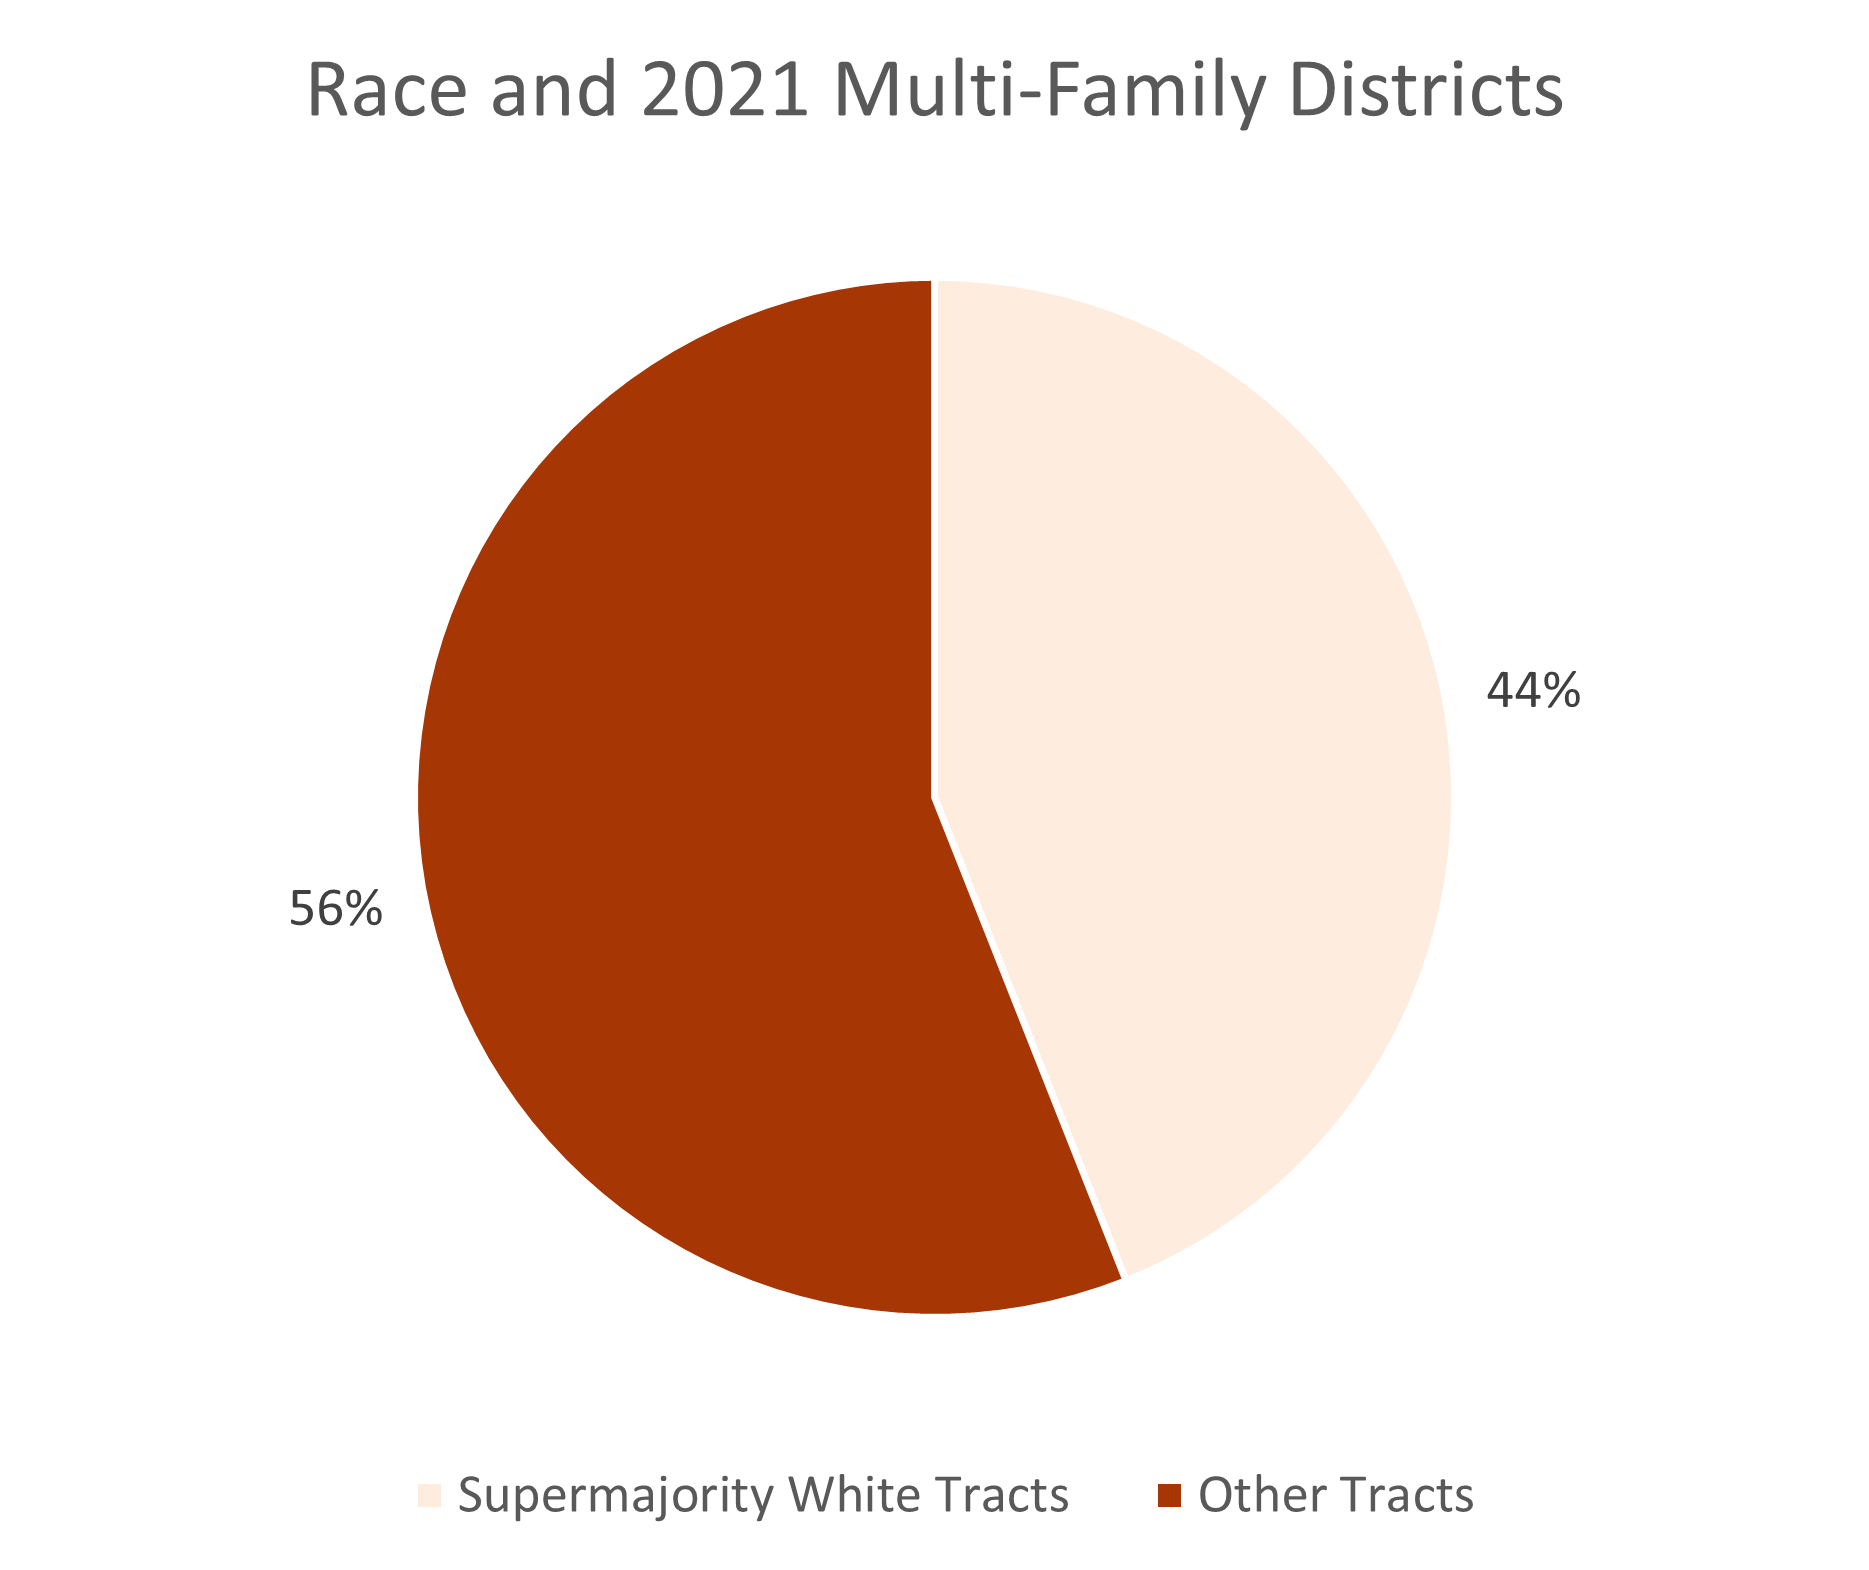 Graph of Race in Multi-Family 2021.png